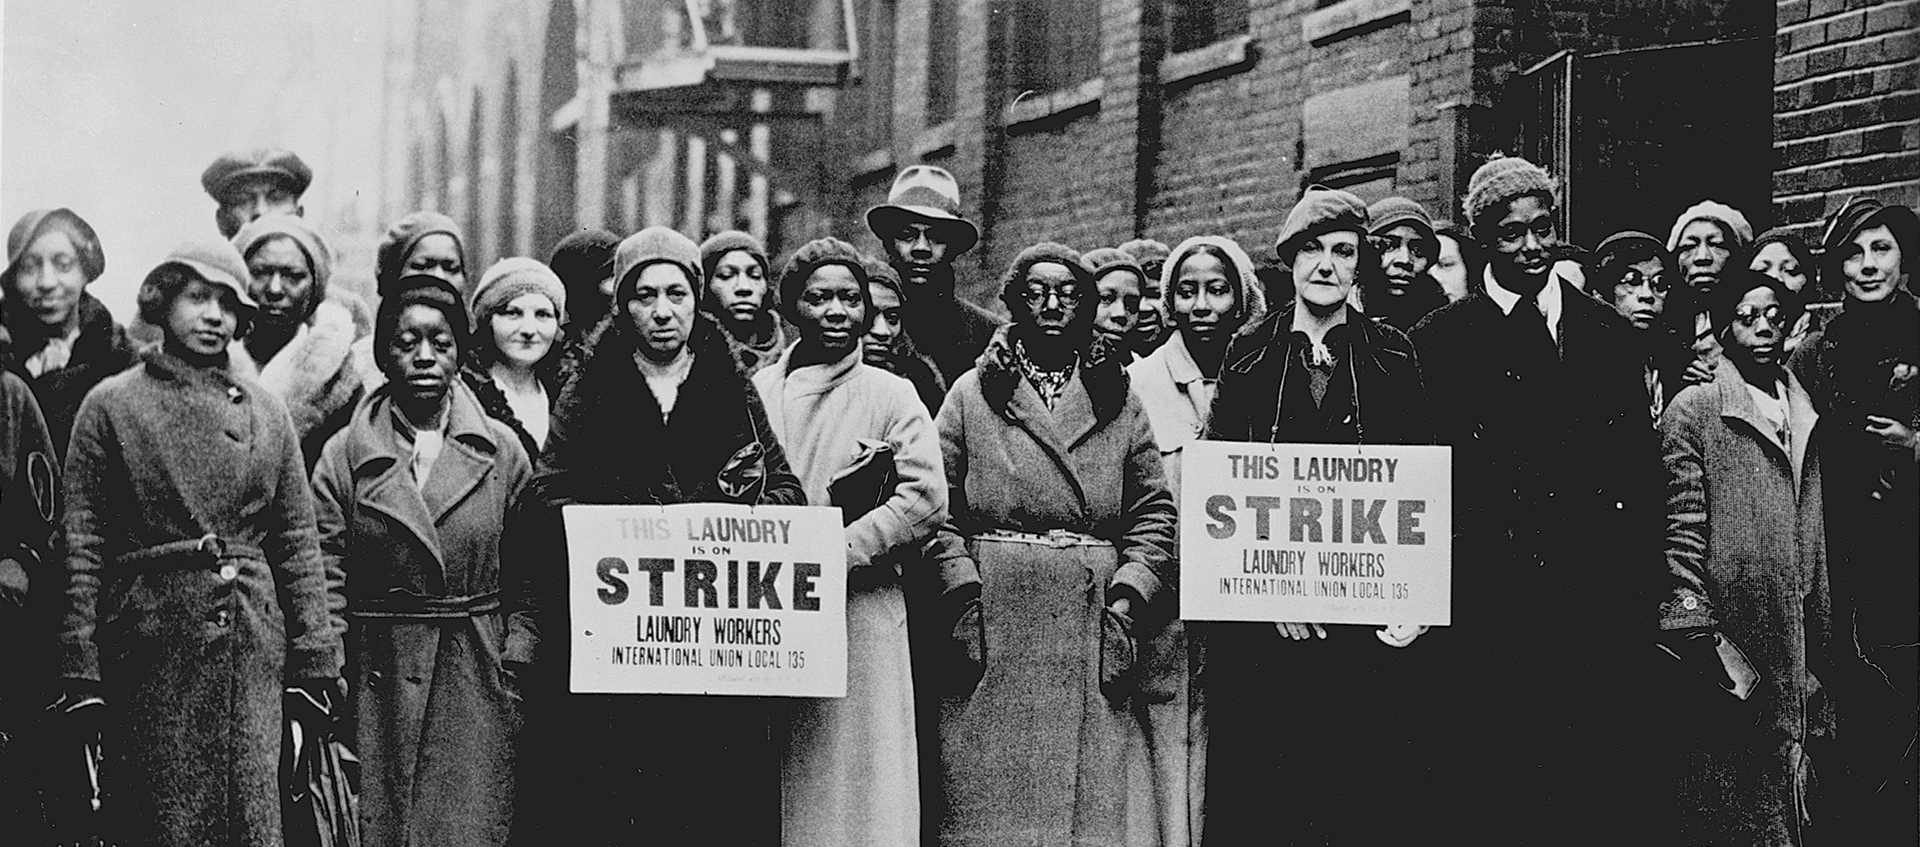 Archive photo of laundry workers striking from Julia Reichert's documentary Union Maids